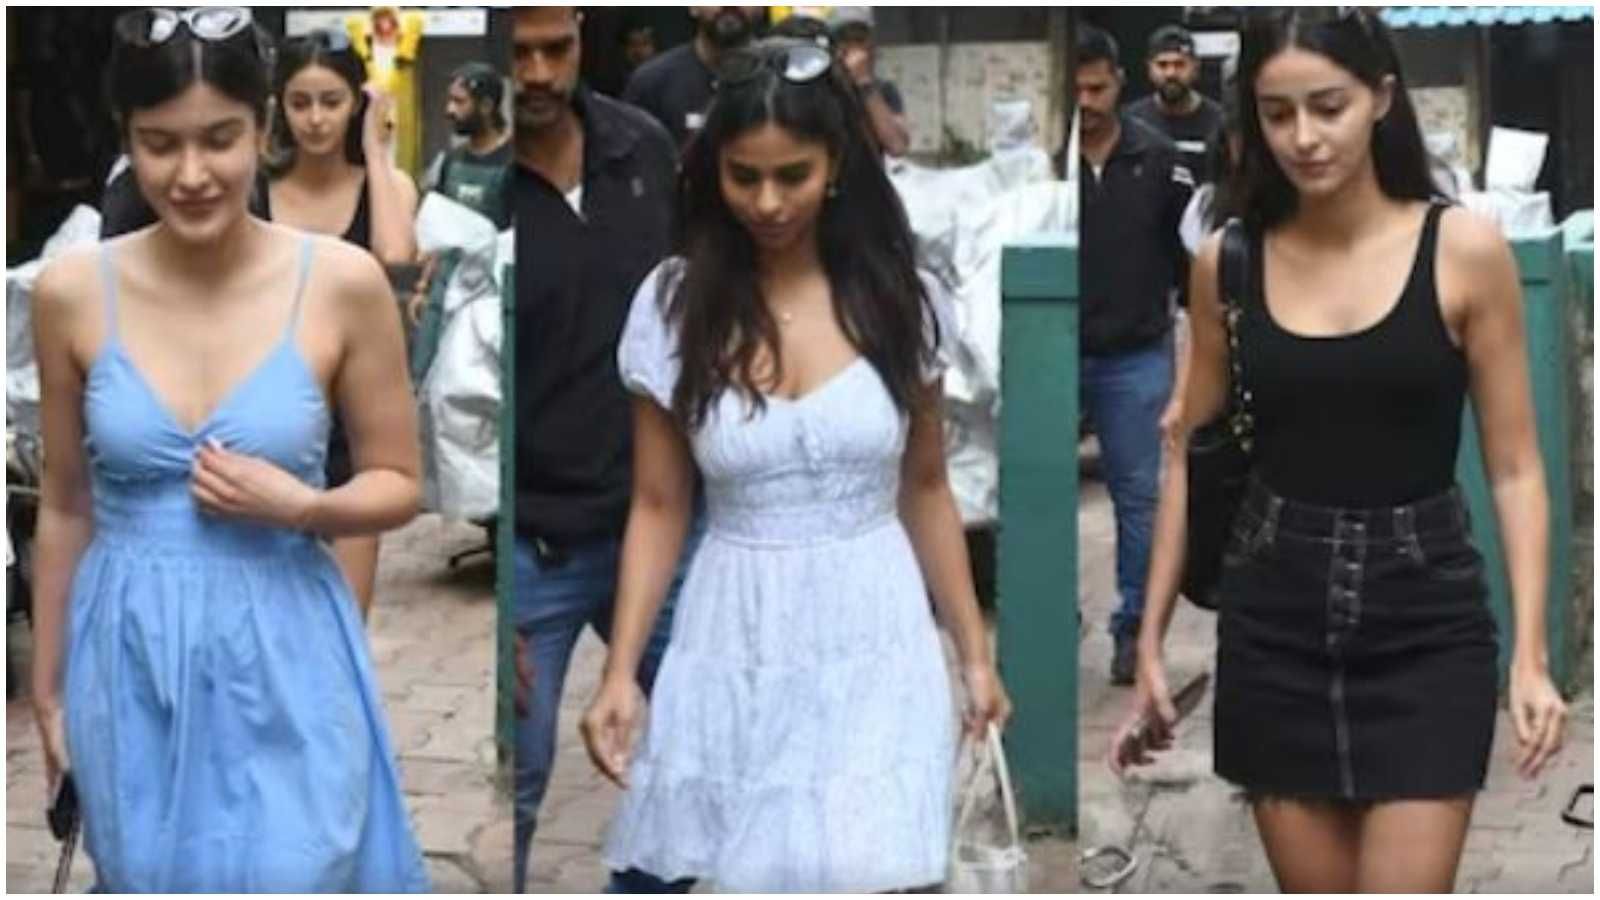 'A lot of struggle in one frame': Ananya Panday, Suhana Khan, Shanaya Kapoor step out for lunch date, get trolled